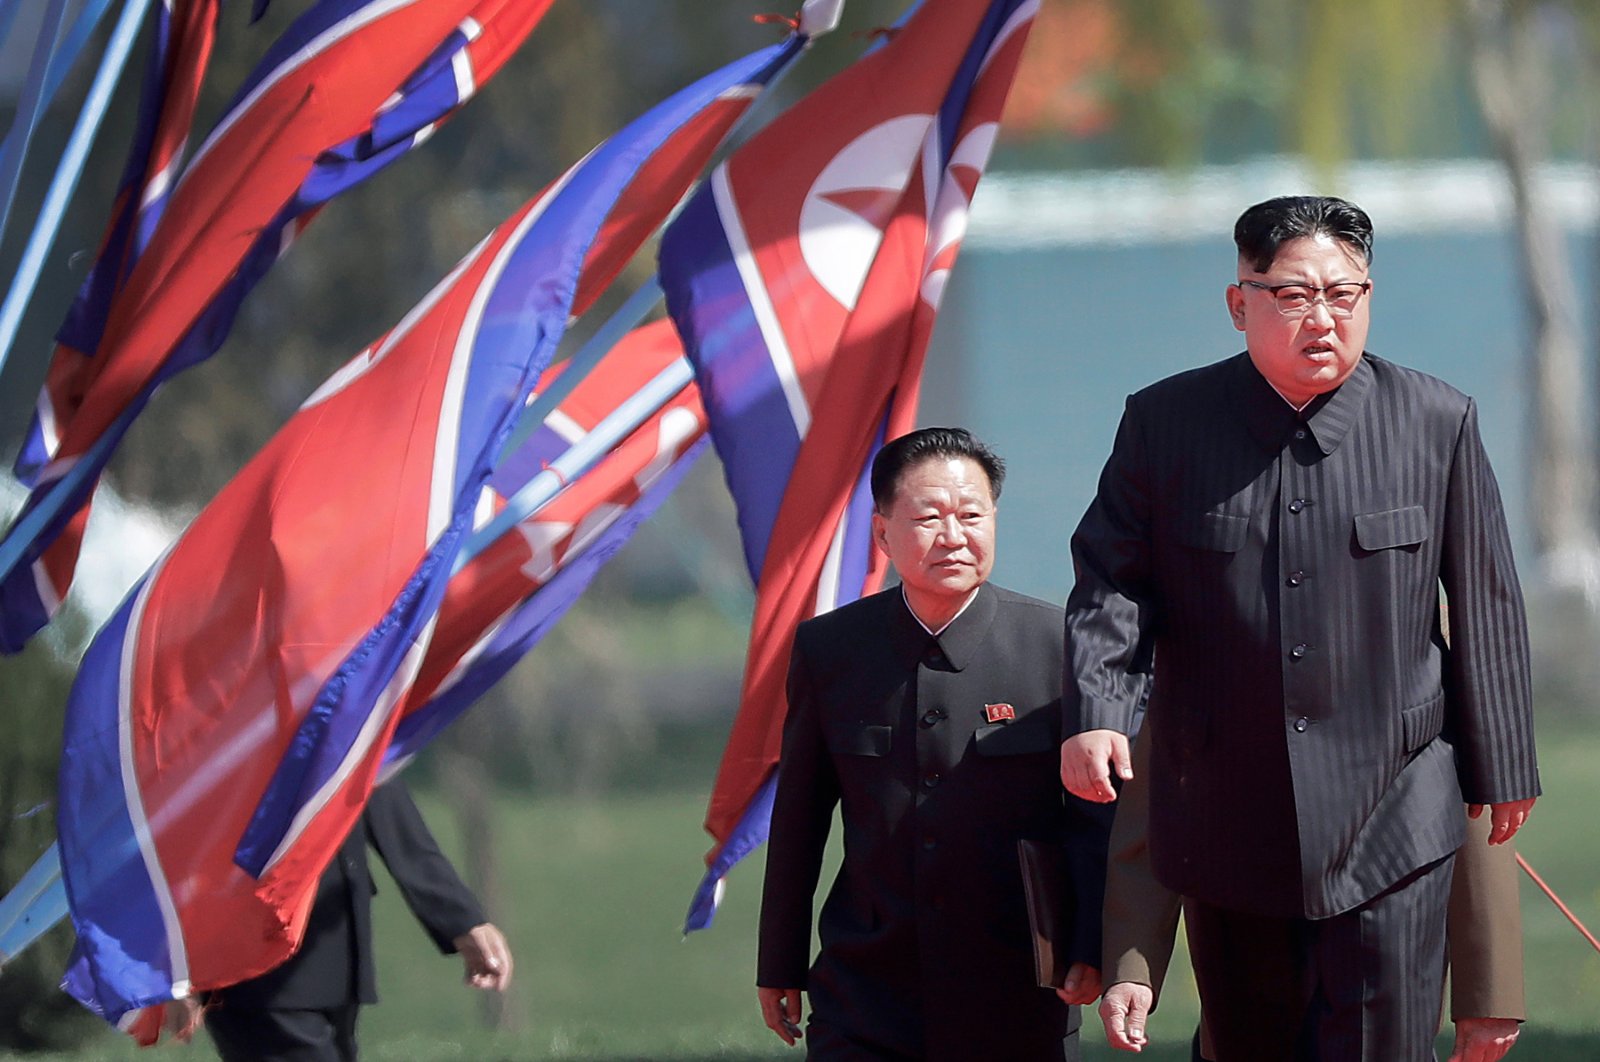 In this April 13, 2017, file photo, North Korean leader Kim Jong Un, right, and Choe Ryong Hae, vice-chairman of the central committee of the Workers' Party, arrive for the official opening of the Ryomyong residential area, in Pyongyang, North Korea. (AP Photo)